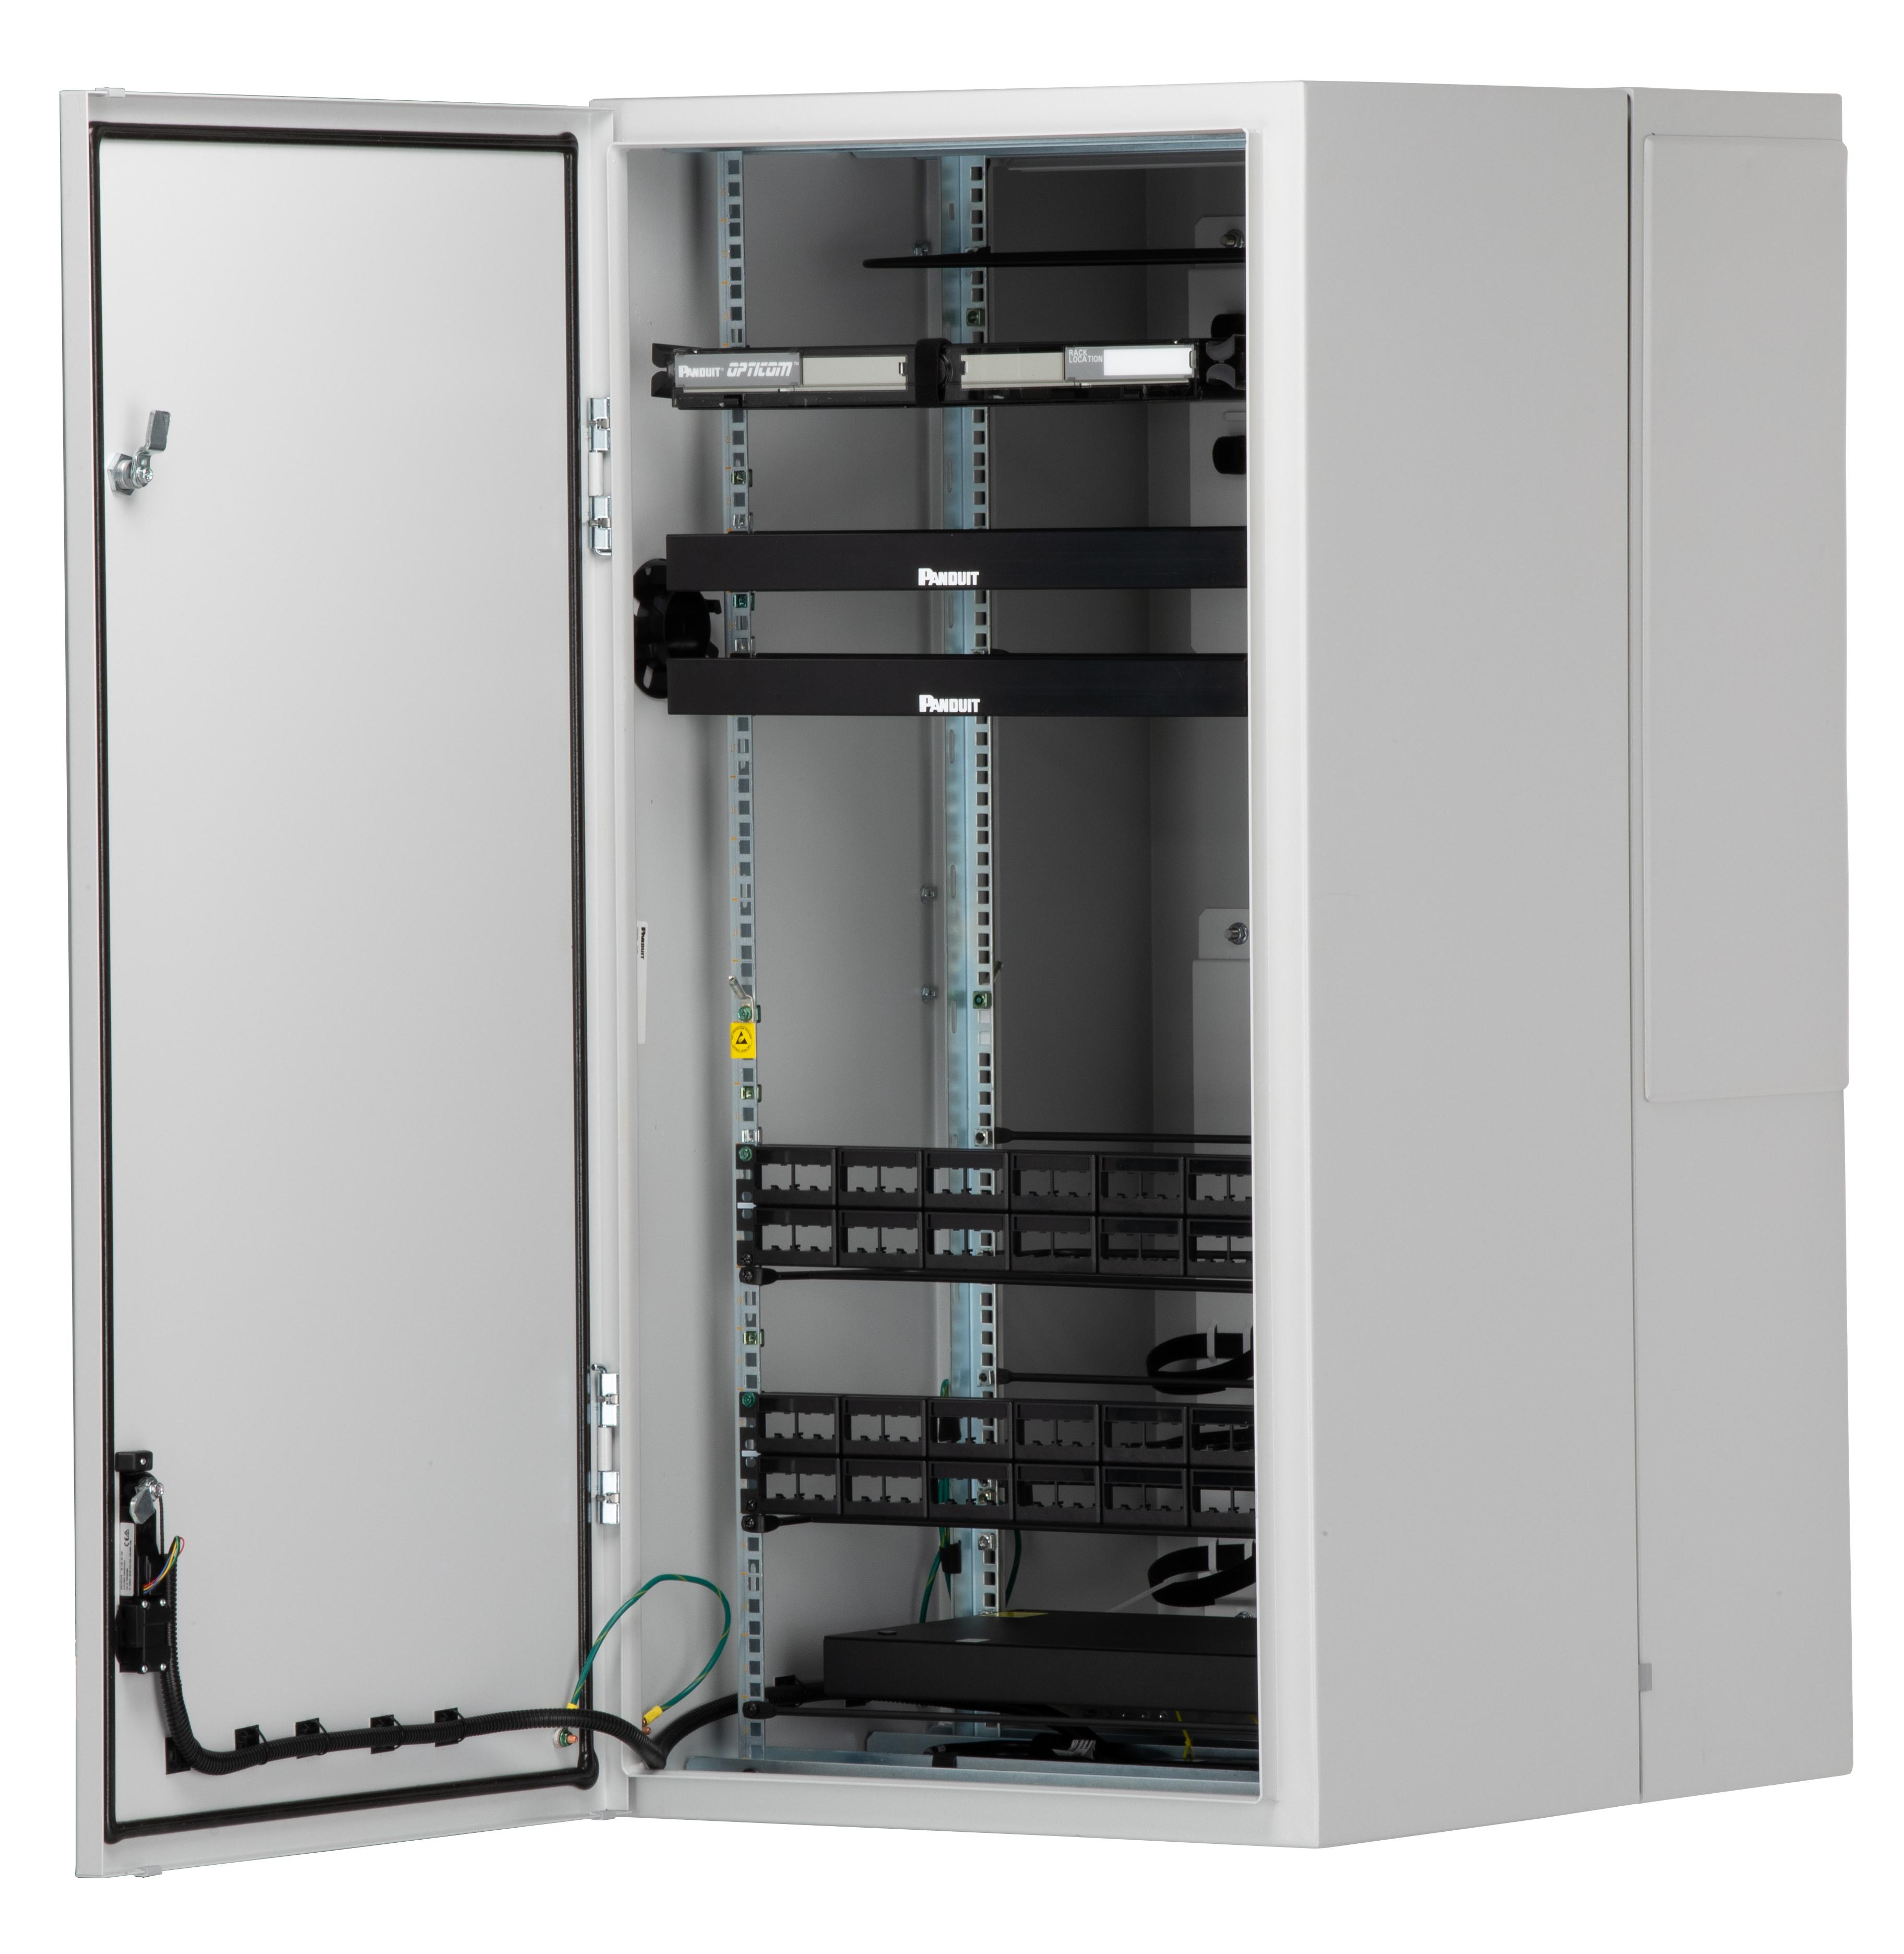 Panduit ZDF48-RADA2 IndustrialNet Pre-Configured Industrial Distribution Frame With Access Control